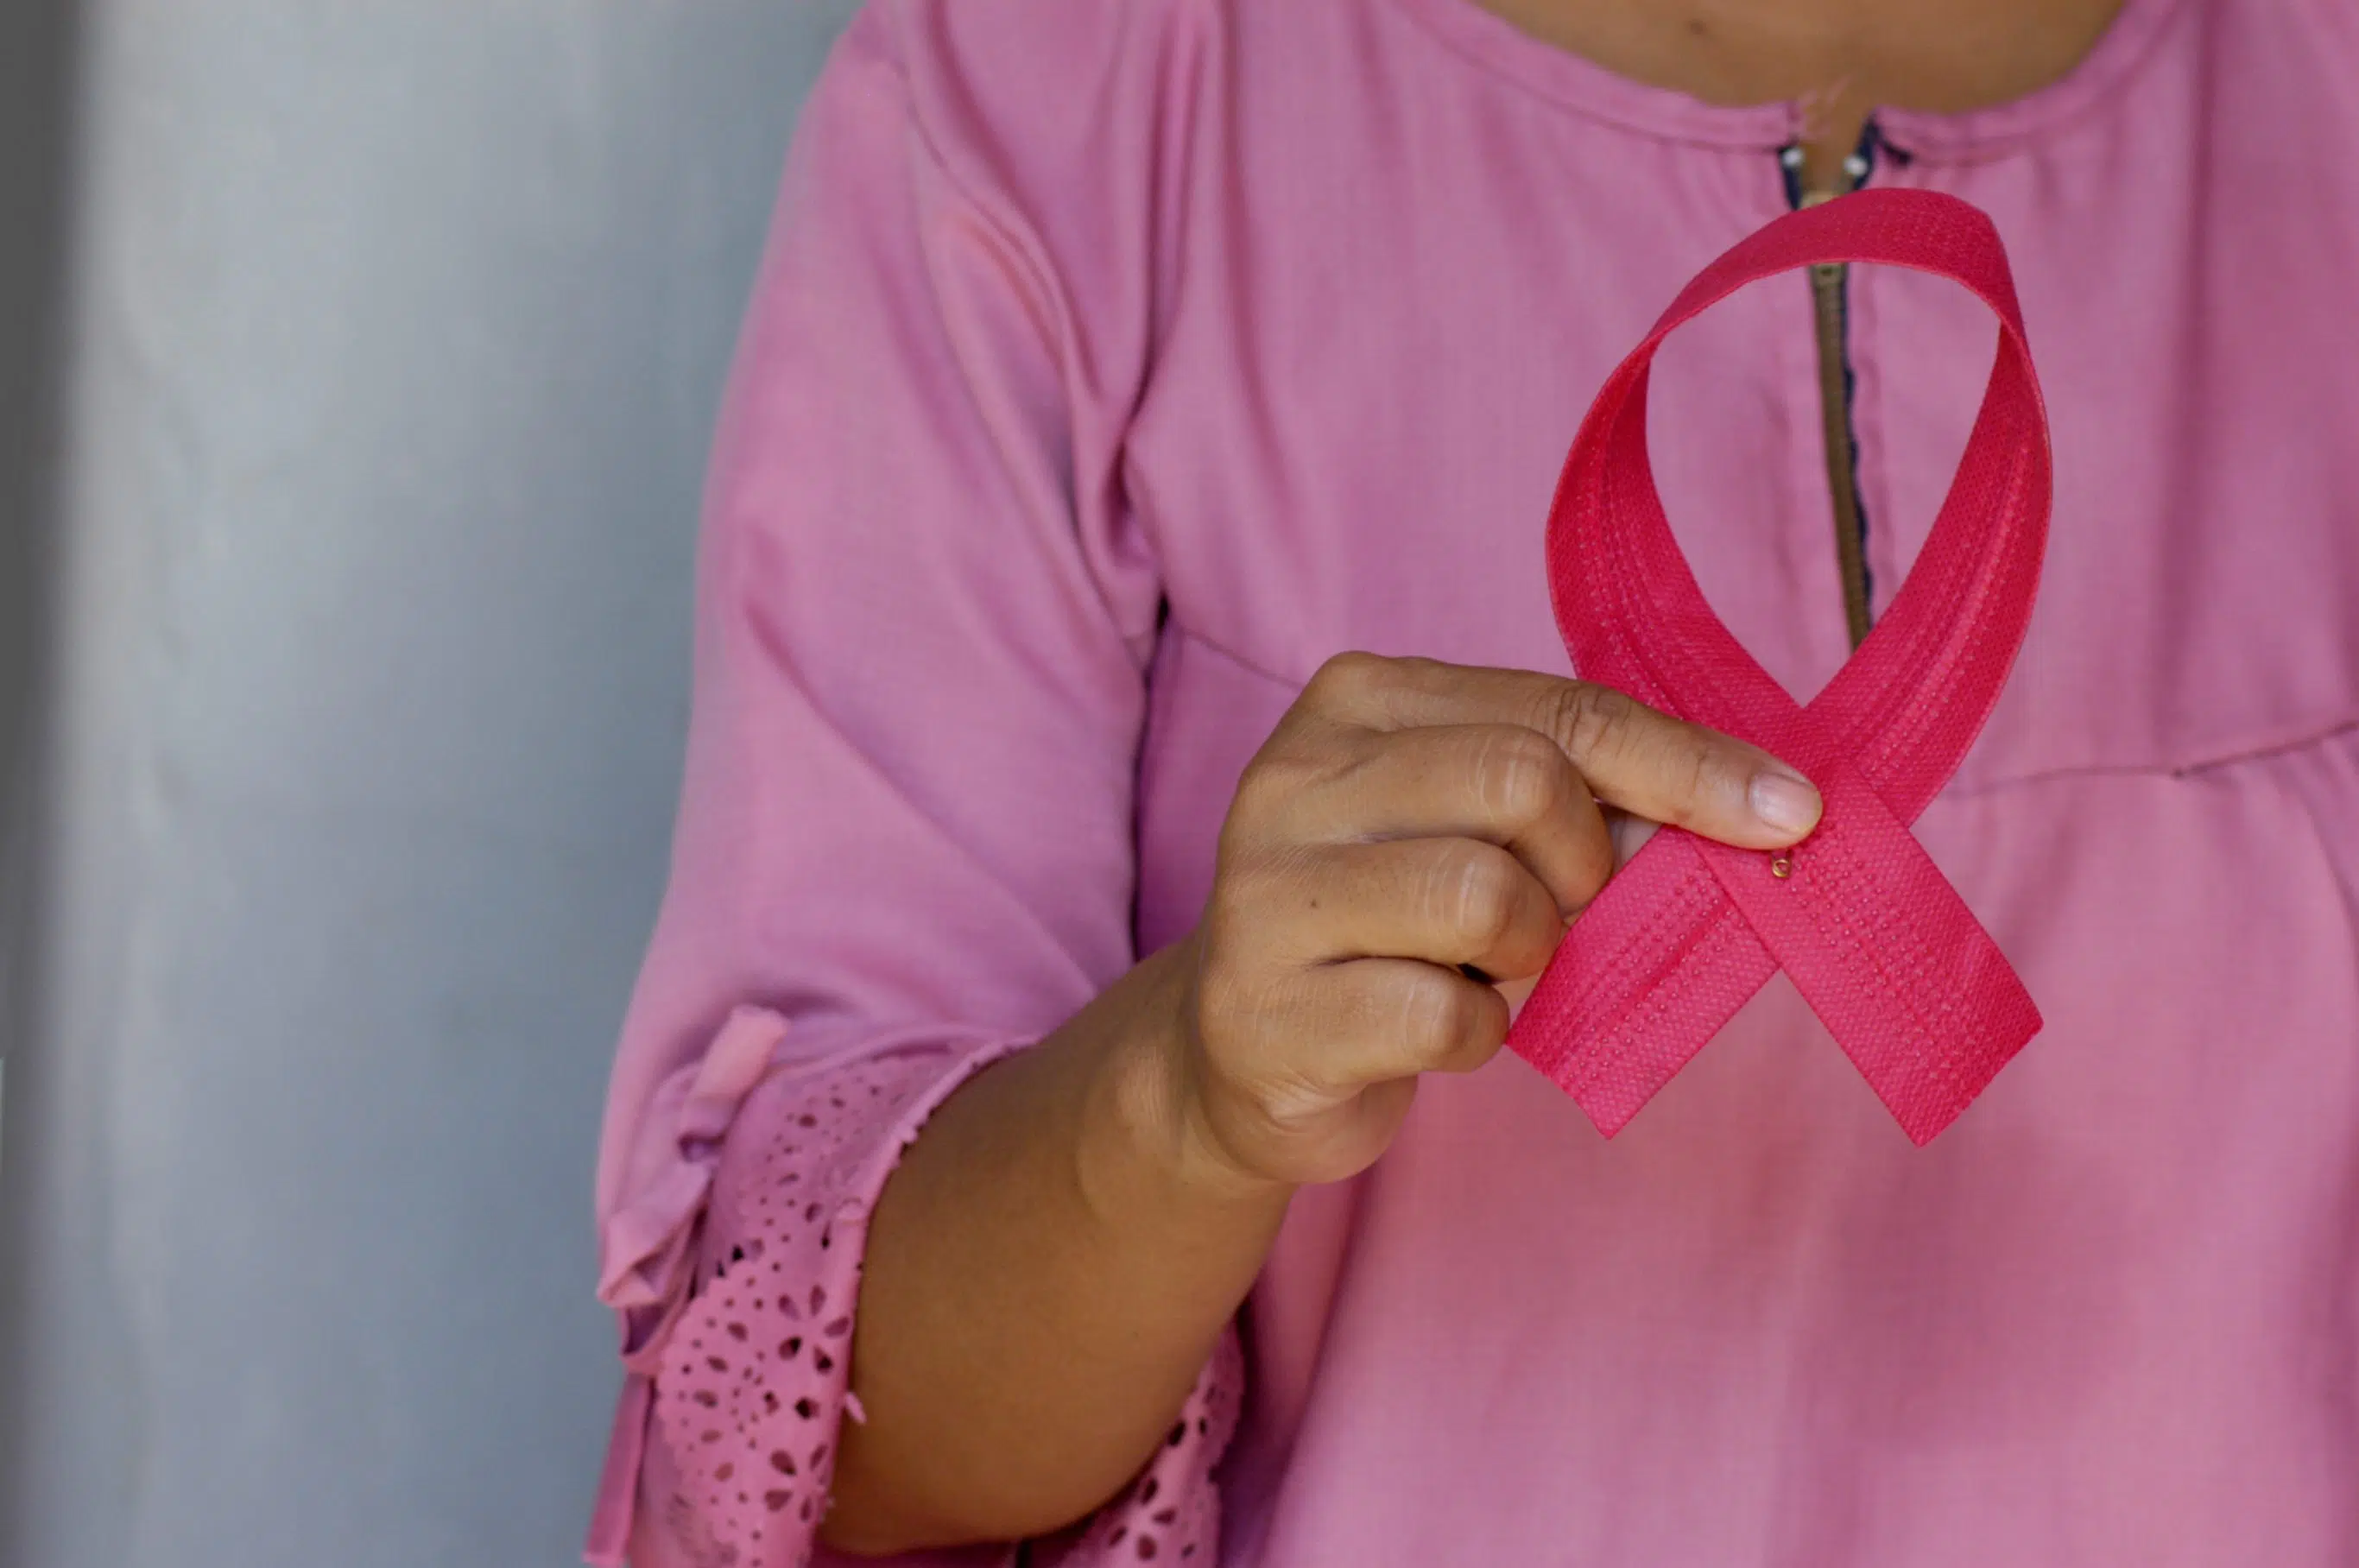 Post pandemic: Surgeons see more women with late stages of breast cancer